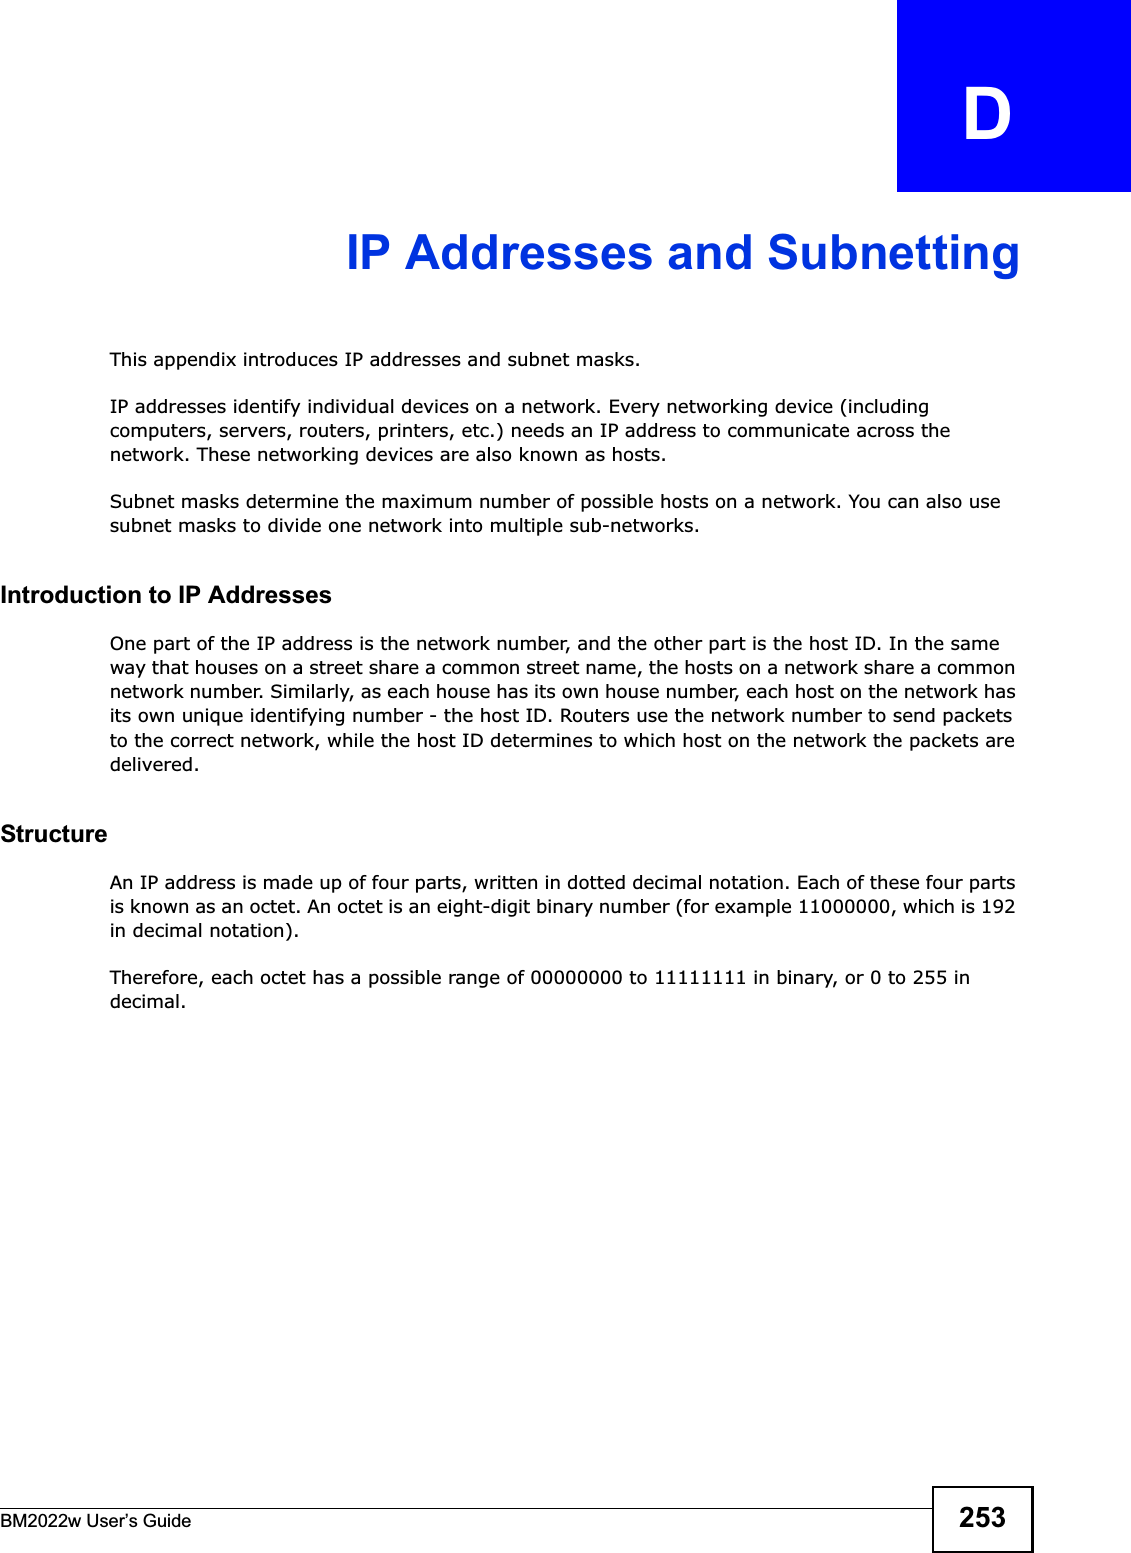 BM2022w User’s Guide 253APPENDIX   DIP Addresses and SubnettingThis appendix introduces IP addresses and subnet masks. IP addresses identify individual devices on a network. Every networking device (including computers, servers, routers, printers, etc.) needs an IP address to communicate across the network. These networking devices are also known as hosts.Subnet masks determine the maximum number of possible hosts on a network. You can also use subnet masks to divide one network into multiple sub-networks.Introduction to IP AddressesOne part of the IP address is the network number, and the other part is the host ID. In the same way that houses on a street share a common street name, the hosts on a network share a common network number. Similarly, as each house has its own house number, each host on the network has its own unique identifying number - the host ID. Routers use the network number to send packets to the correct network, while the host ID determines to which host on the network the packets are delivered.StructureAn IP address is made up of four parts, written in dotted decimal notation. Each of these four parts is known as an octet. An octet is an eight-digit binary number (for example 11000000, which is 192 in decimal notation). Therefore, each octet has a possible range of 00000000 to 11111111 in binary, or 0 to 255 in decimal.